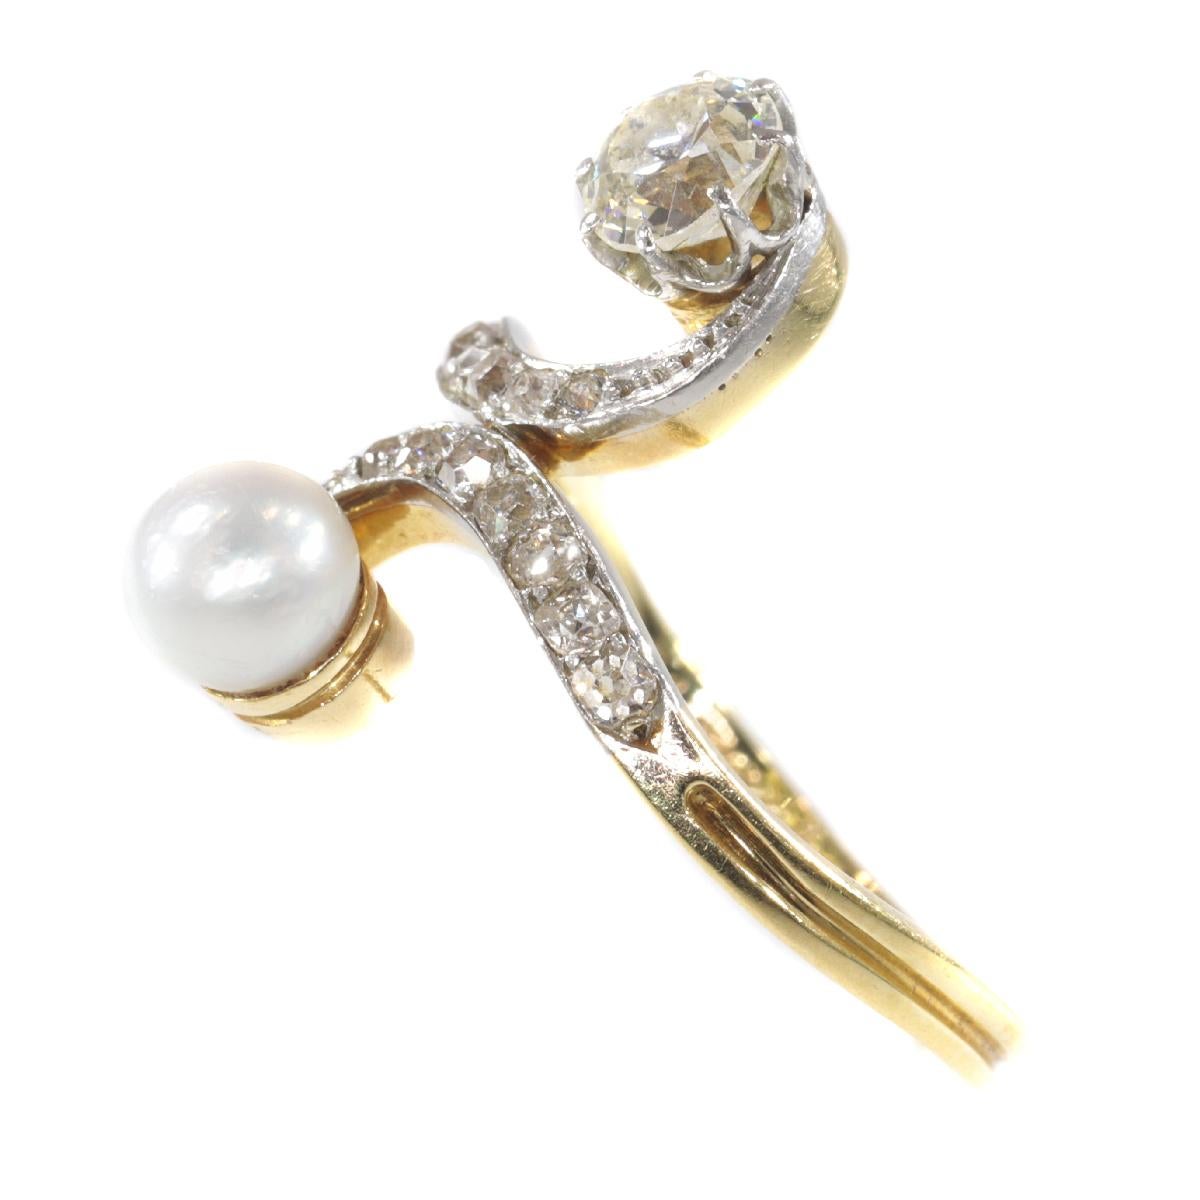 Elegant Belle Epoque Diamond and Pearl Engagement Ring so Called Toi et Moi In Excellent Condition For Sale In Antwerp, BE